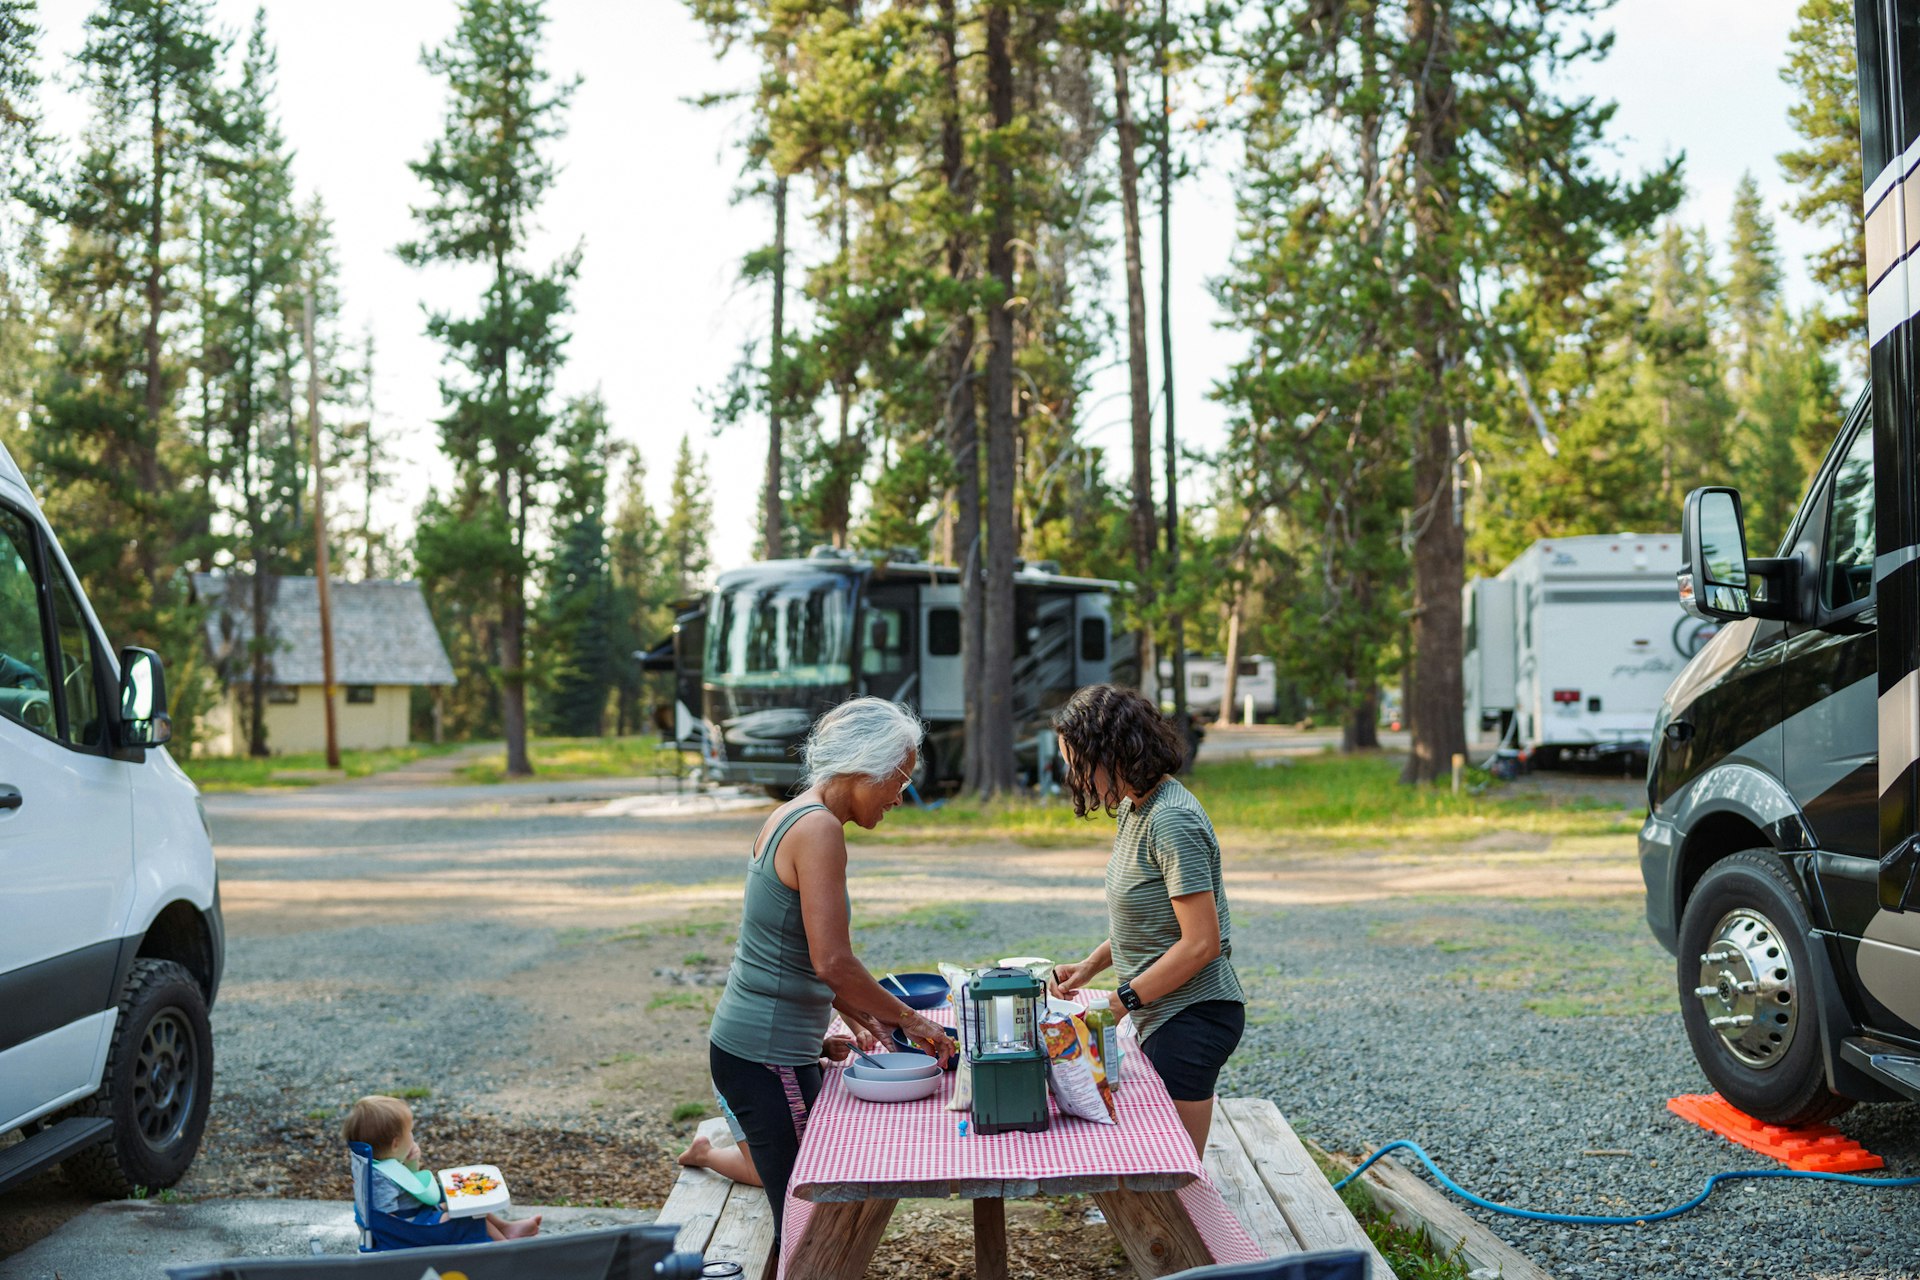 Two women prepare a meal at a picnic table beside an RV camper parked in a scenic tree-lined campsite